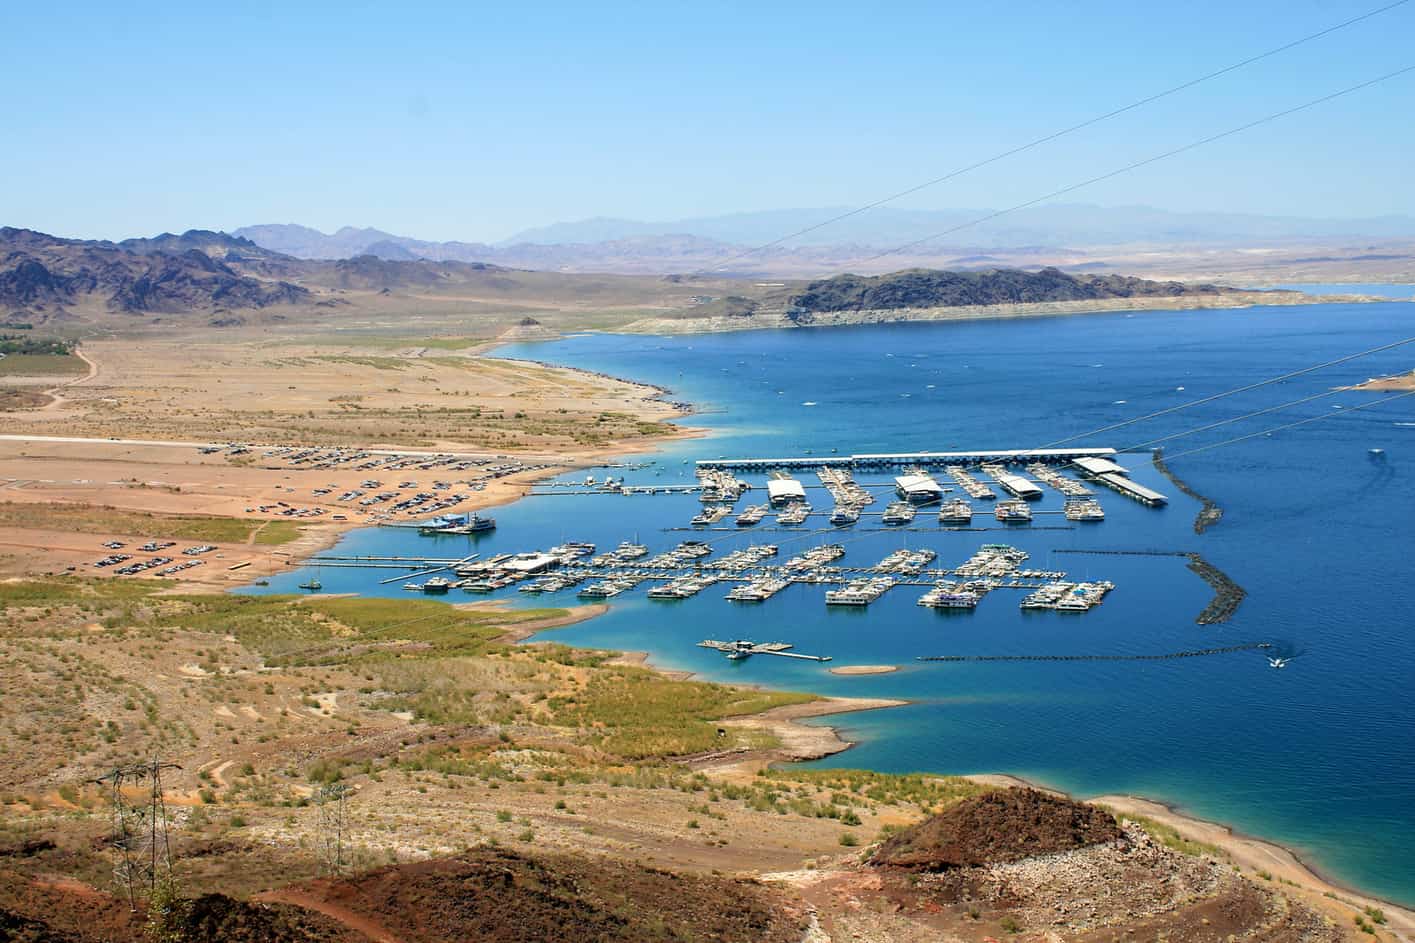 Boating at Lake Mead, one of the best things to do in Nevada